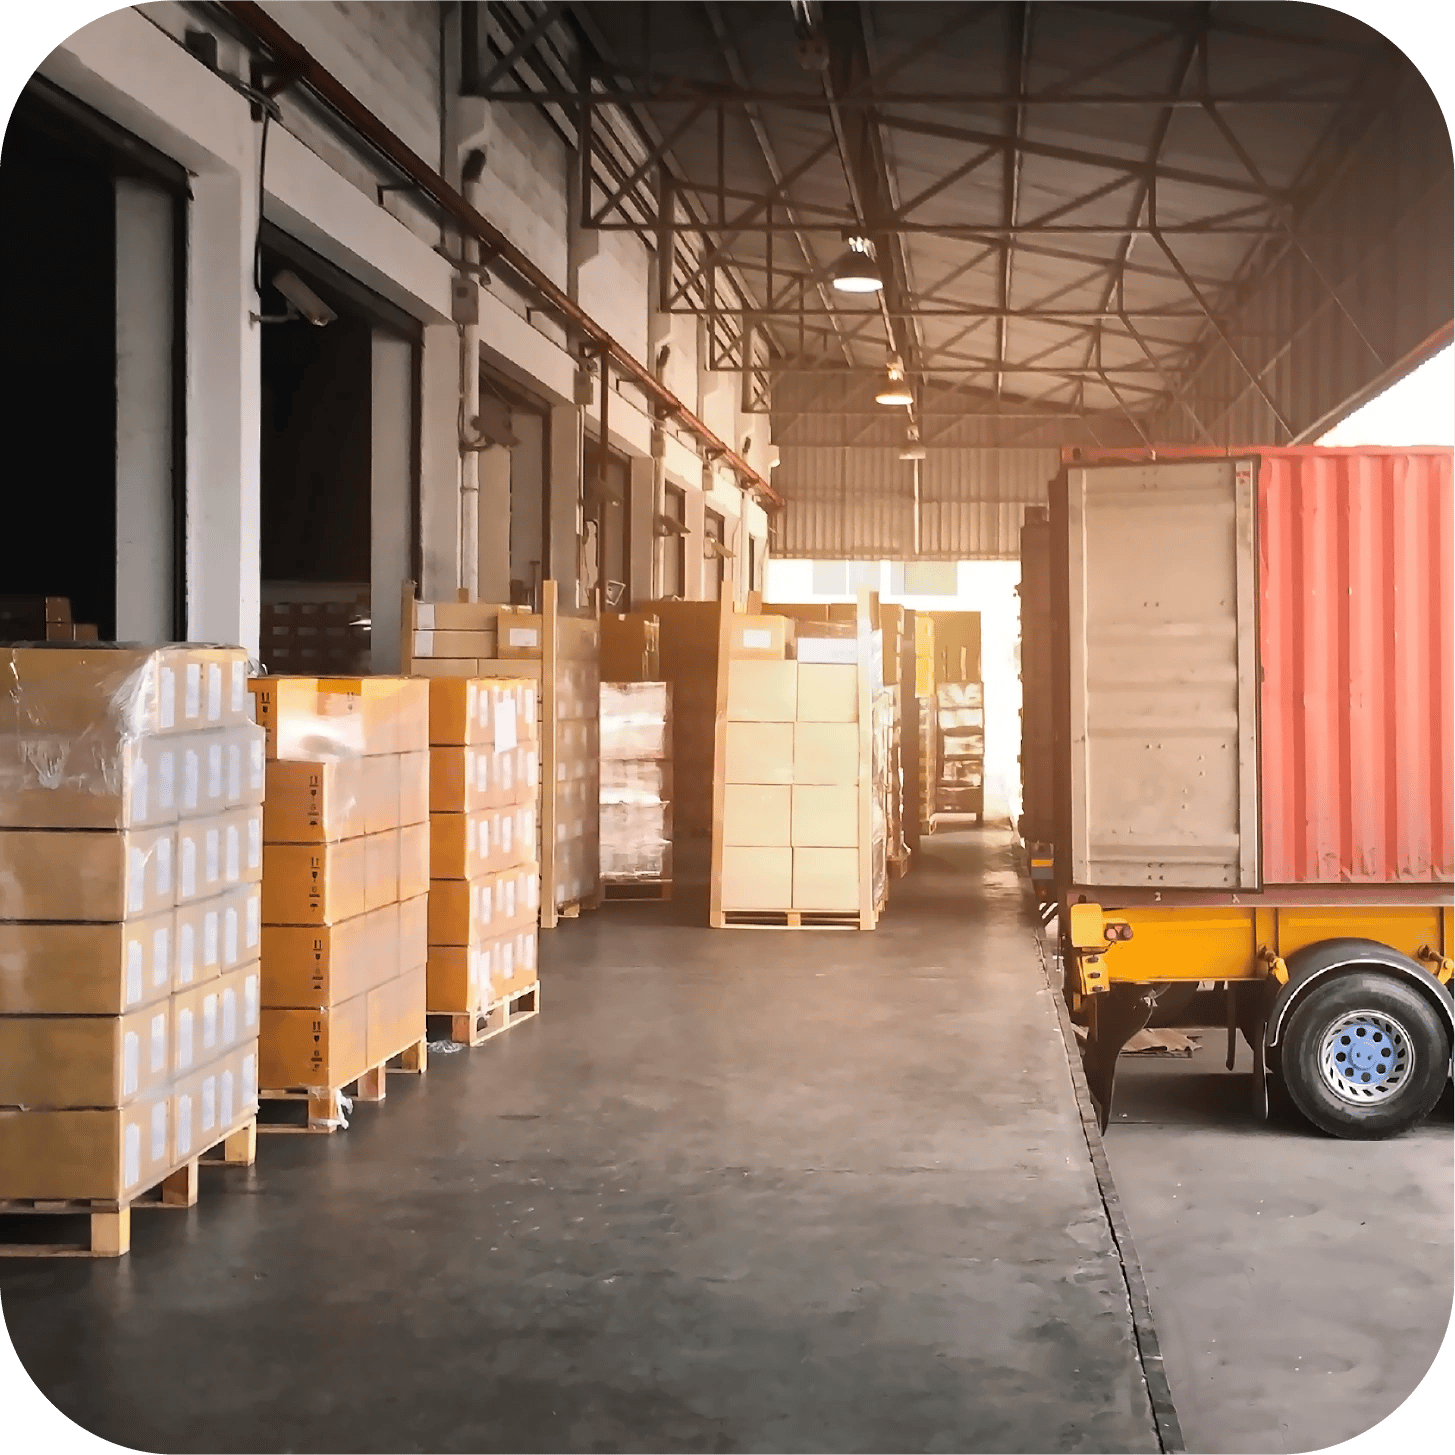 gain complete visibility of your warehouse with an RTLS solution